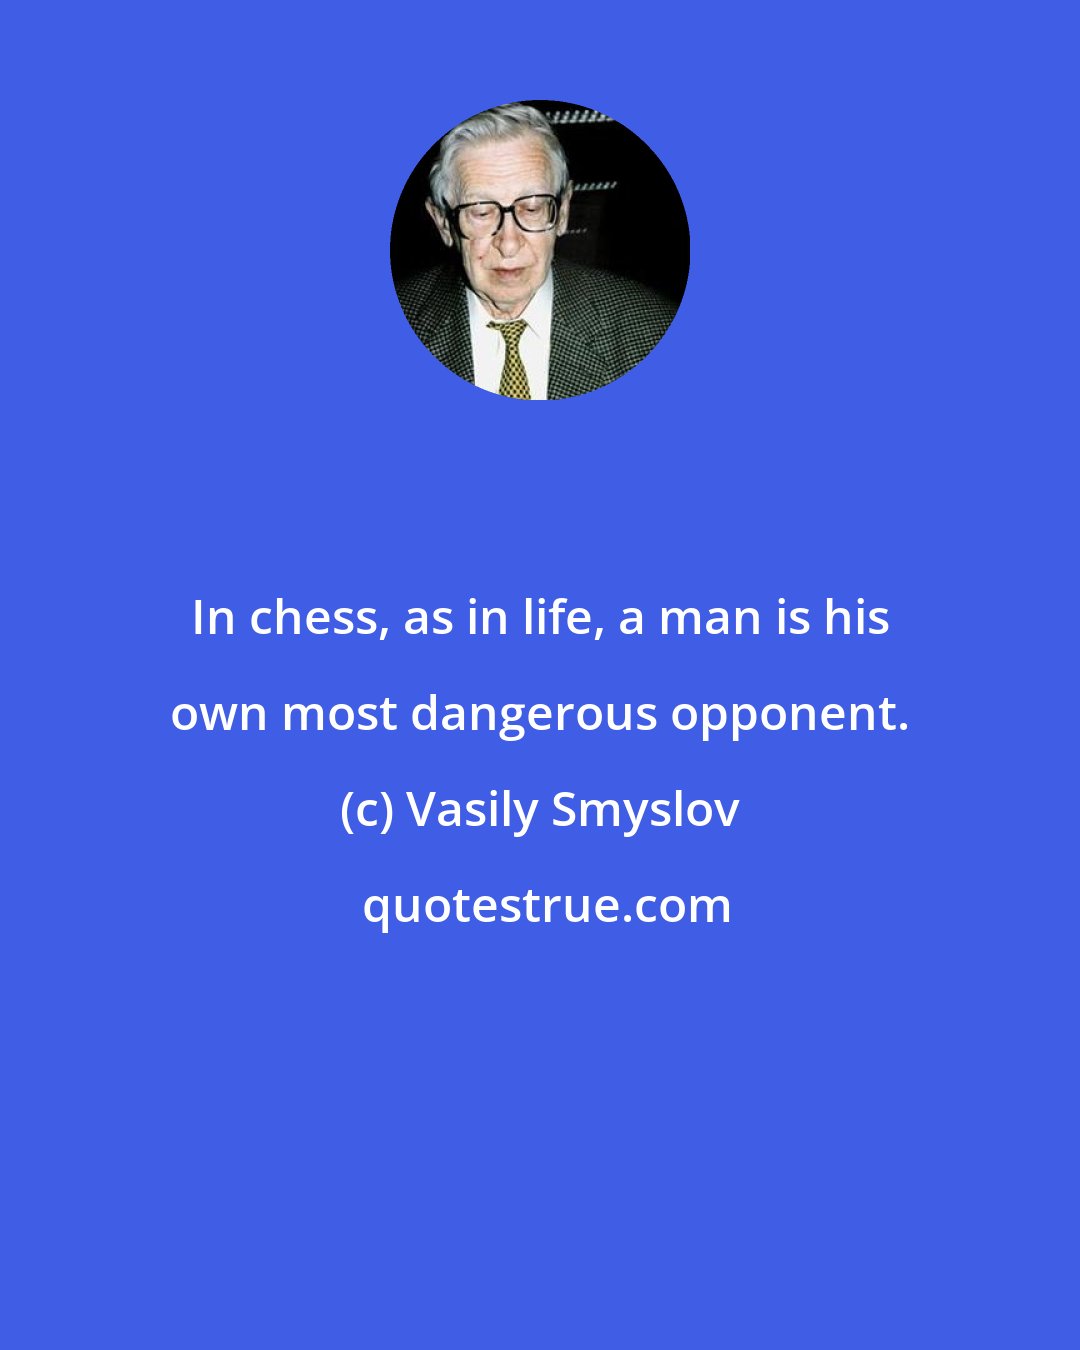 Vasily Smyslov: In chess, as in life, a man is his own most dangerous opponent.